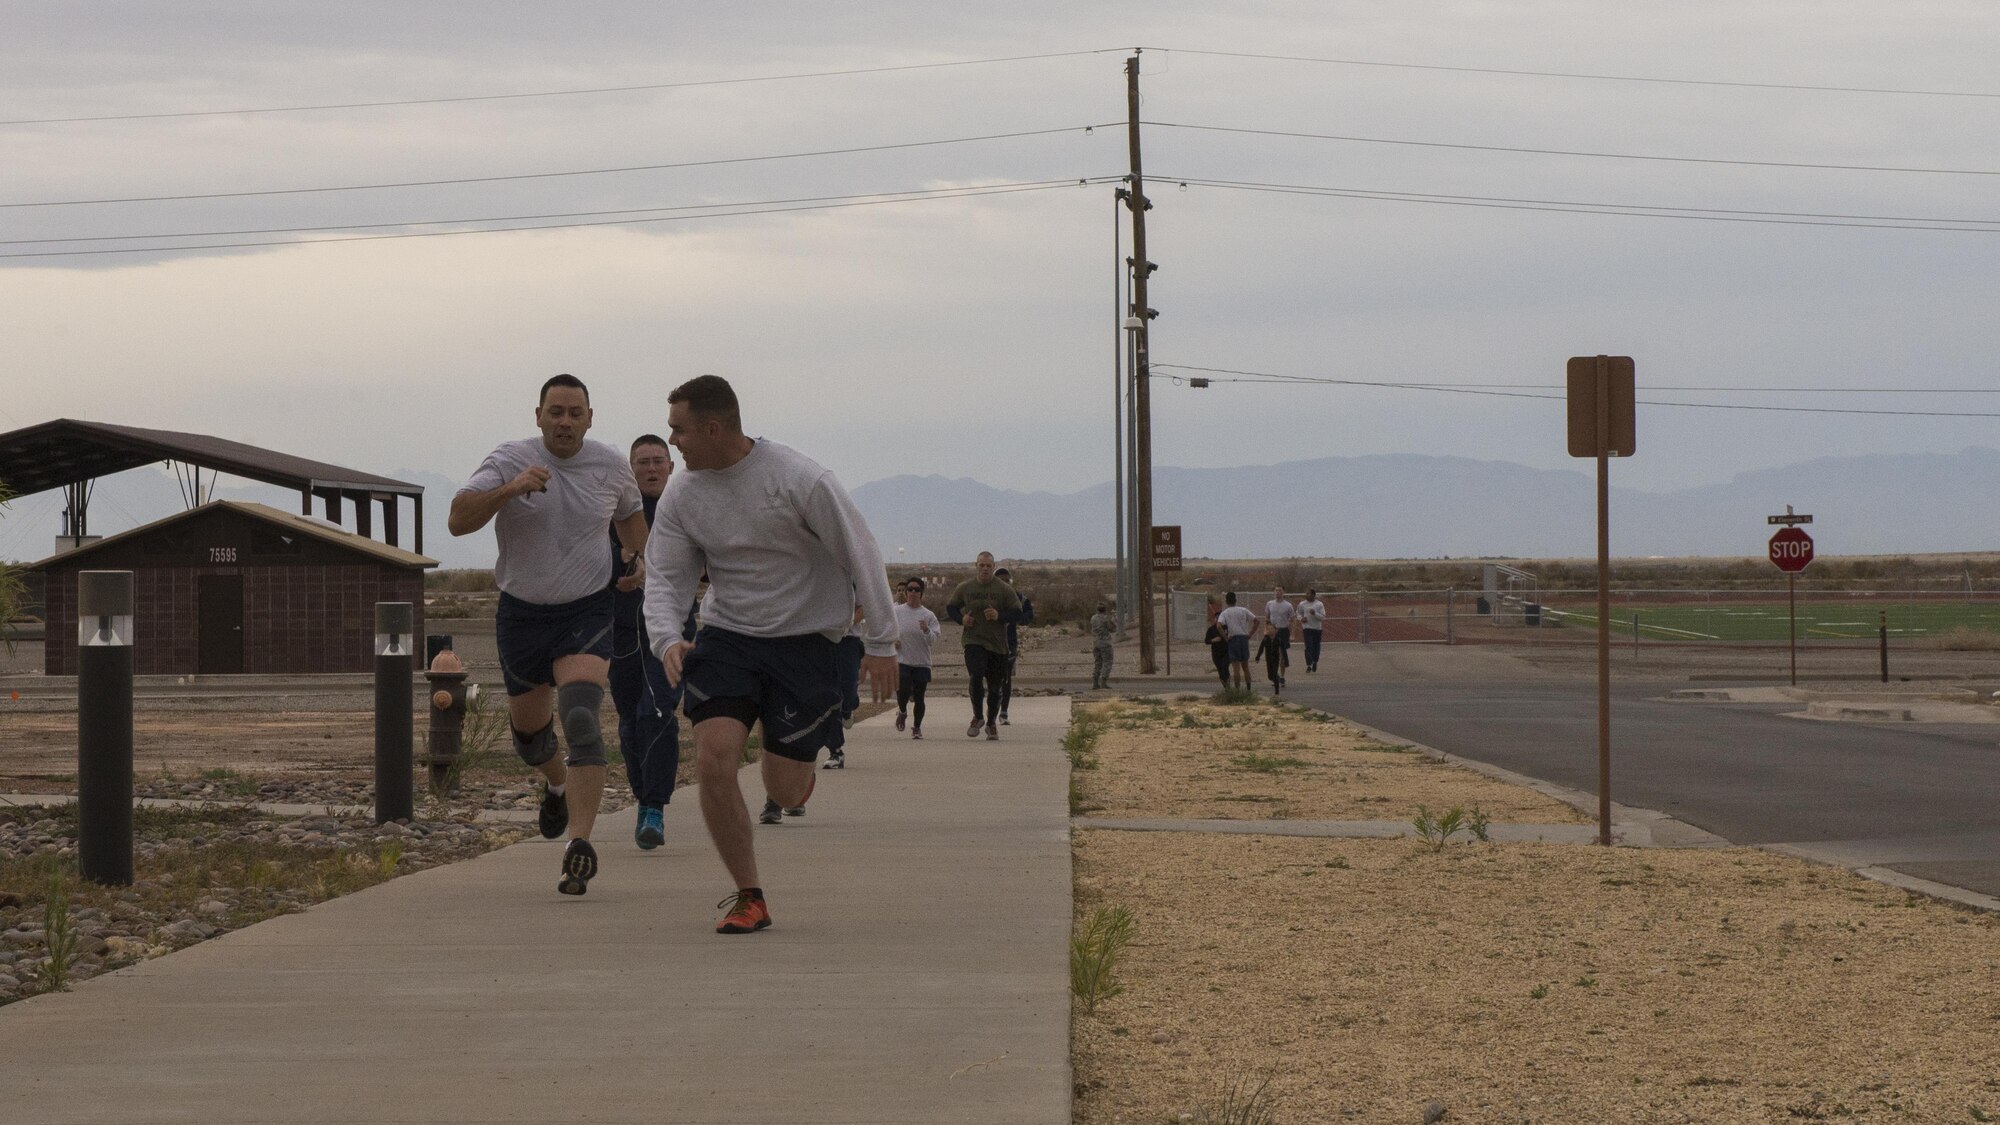 Participants race to the finish line during the 49th Force Support Squadron’s annual Turkey Trot on Nov. 21, 2016 at Holloman Air Force Base, N.M. The first, second, and third place winners were Thomas, Keonte, with the 49th Civil Engineer Squadron, and Michael, with the 54th Aircraft Maintenance Squadron, respectively. (U.S. Air Force photo by Airman 1st Class Alexis P. Docherty. Last names are being withheld due to operational requirements.) 